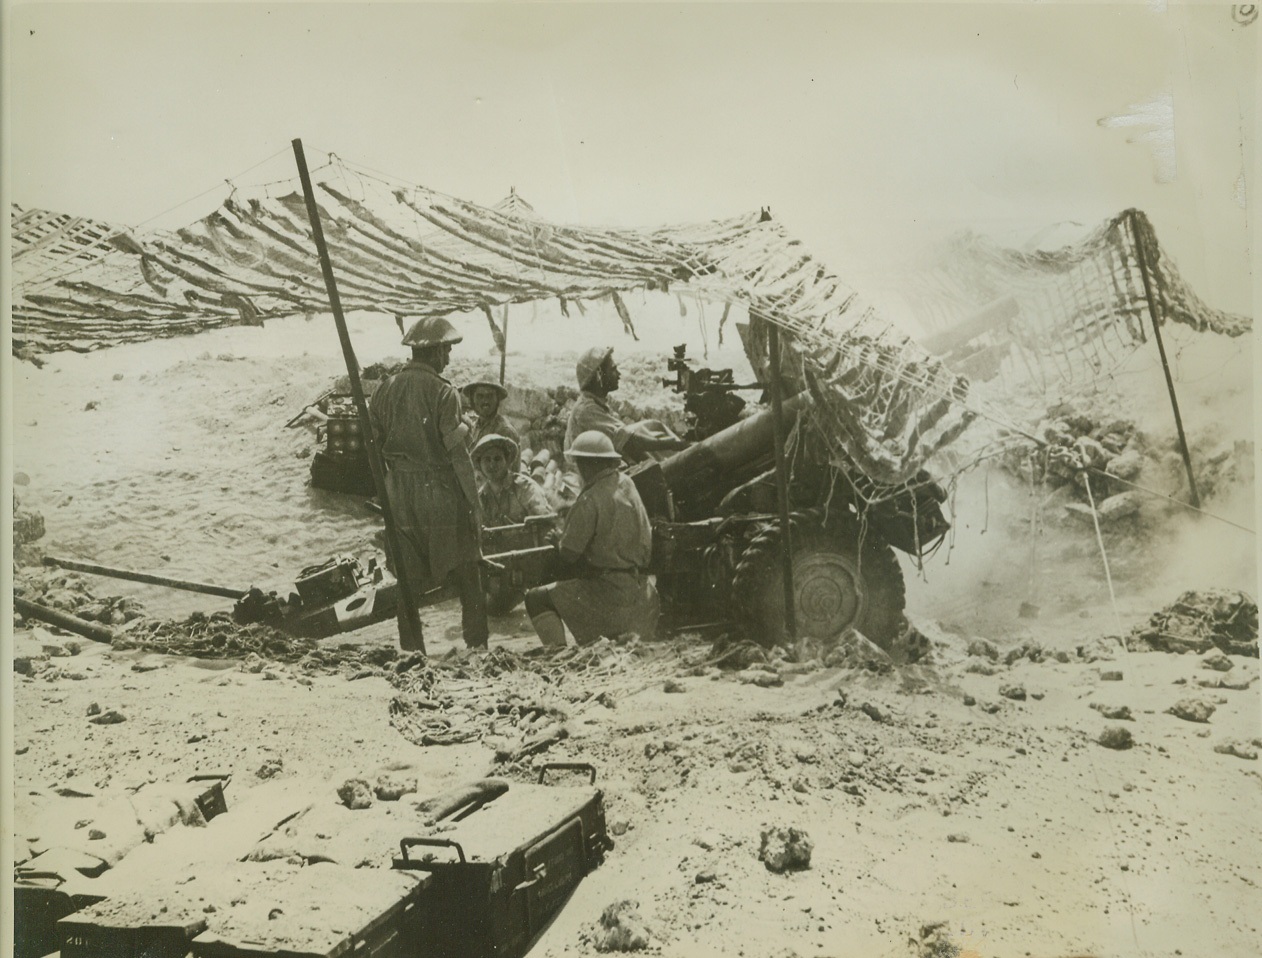 DESERT DEATH, 11/6/1942. WESTERN DESERT – Under a netting that camouflages the heavy cannon from enemy aircraft, a Greek Army crew fires a shell into an enemy aircraft position in the Western Desert. Latest reports indicate the Axis forces are being crushed by the fury of the United Nations dive to push Rommel’s army out of Africa. Credit: ACME;